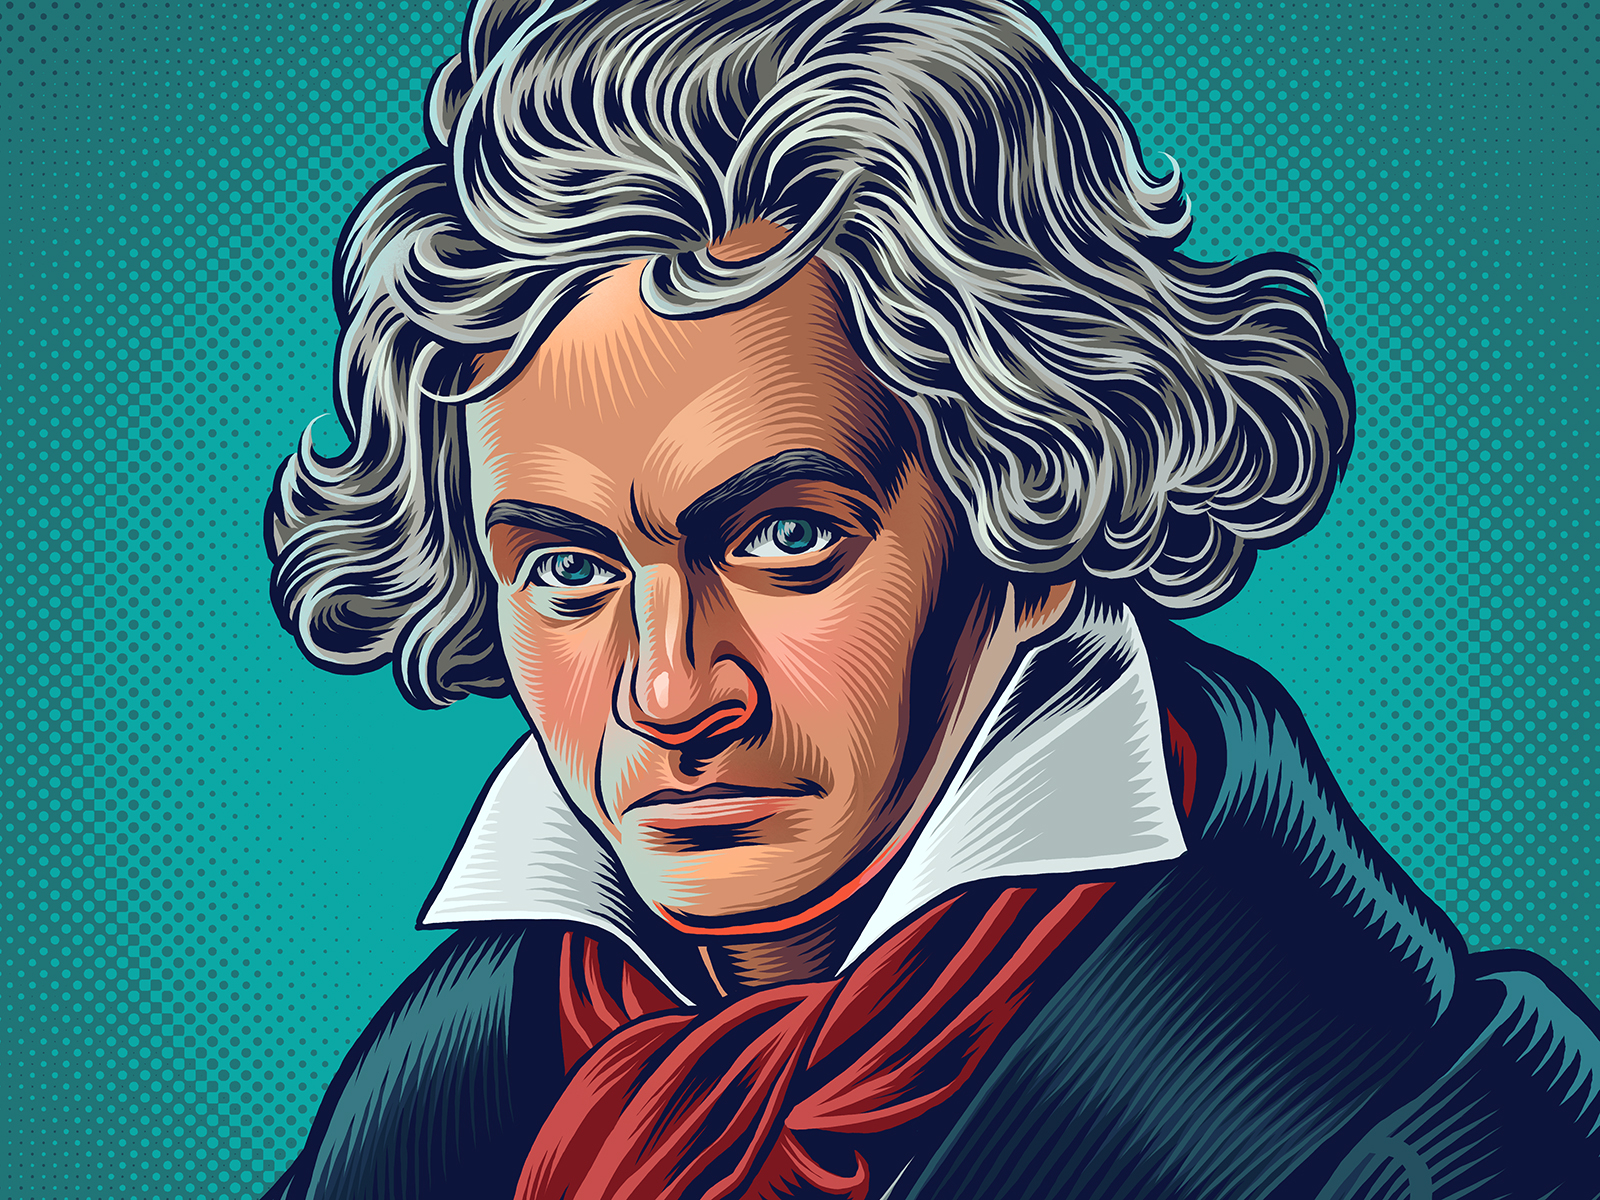 Beethoven Portrait by Mario Zucca on Dribbble